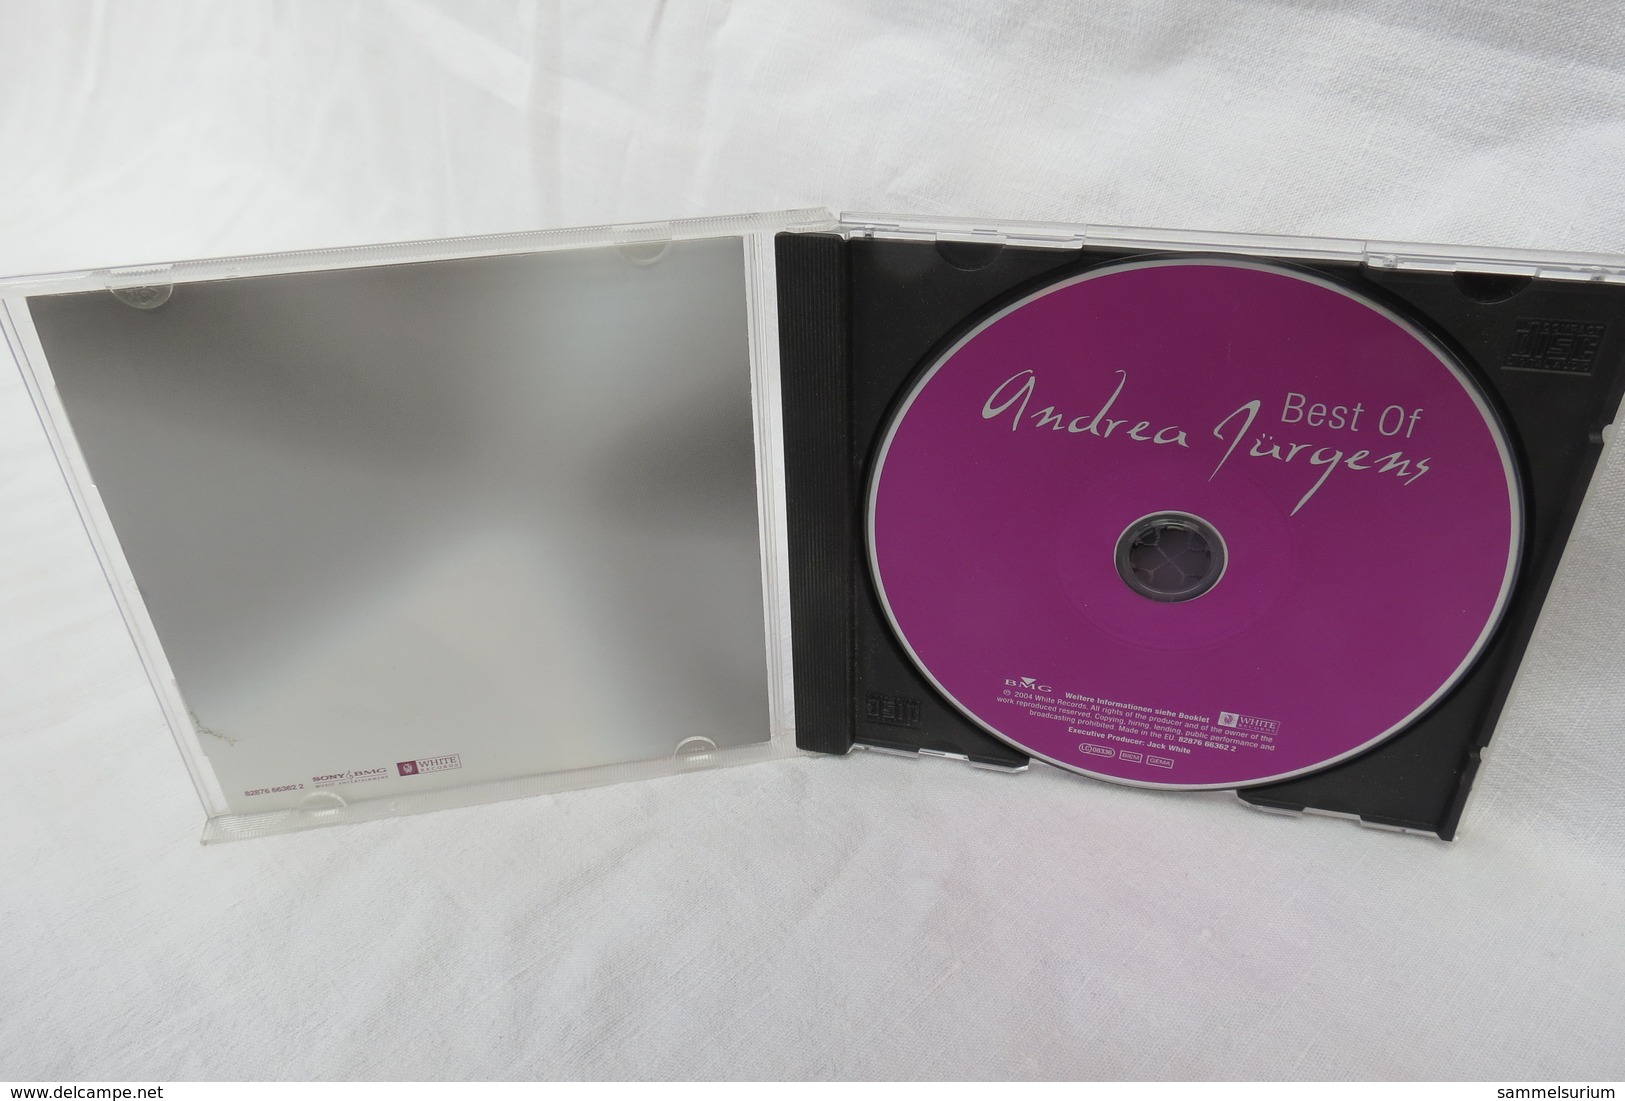 CD "Andrea Jürgens" Best Of - Other - German Music